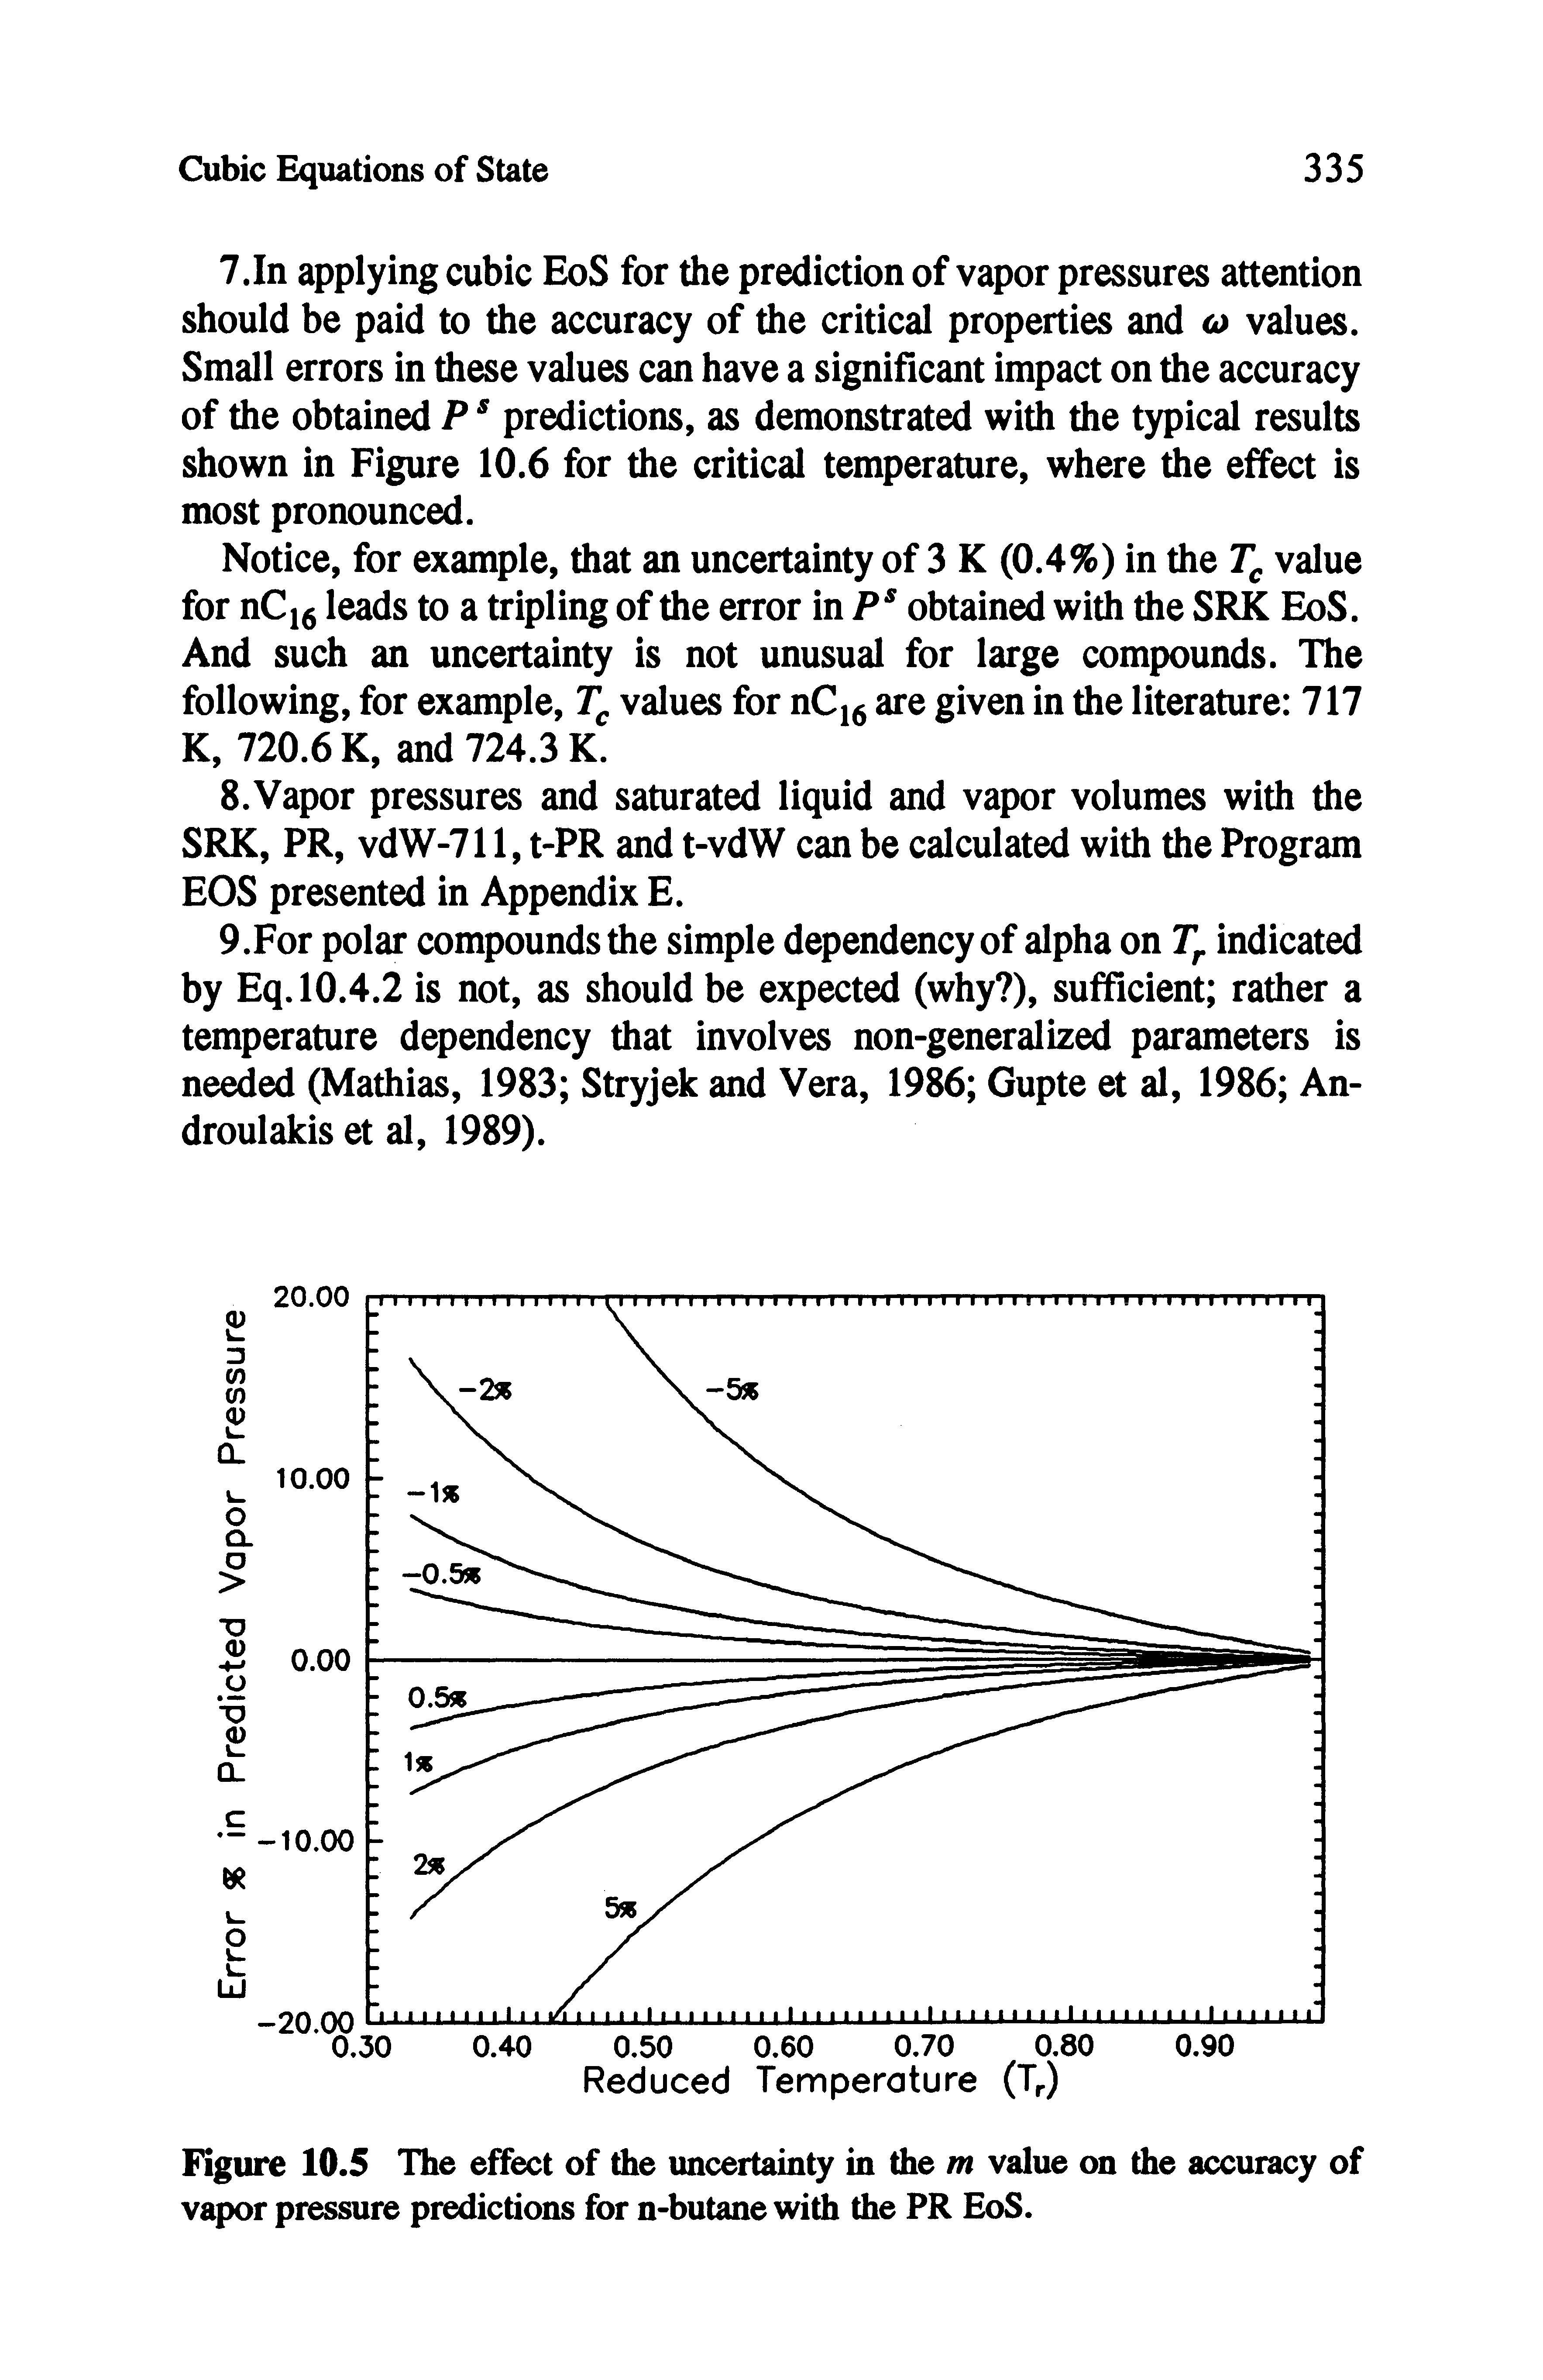 Figure 10.5 The effect of the uncertainty in the m value on the accuracy of vapor pressure predictions for n-butane with the PR EoS.